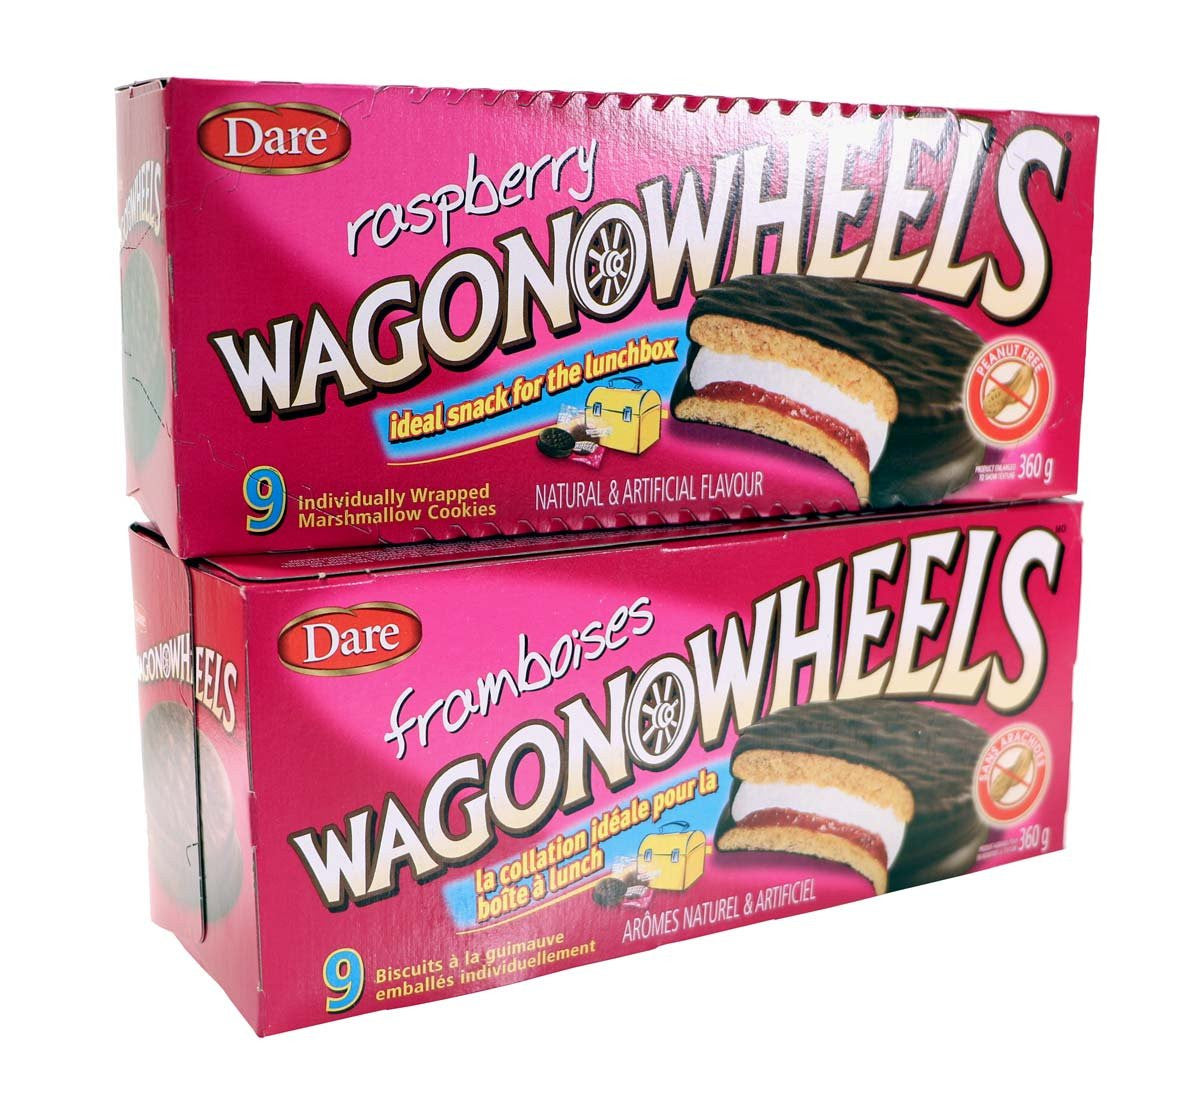 Dare Raspberry Wagon Wheels Cookies 9ct, (2-pack){Imported from Canada}